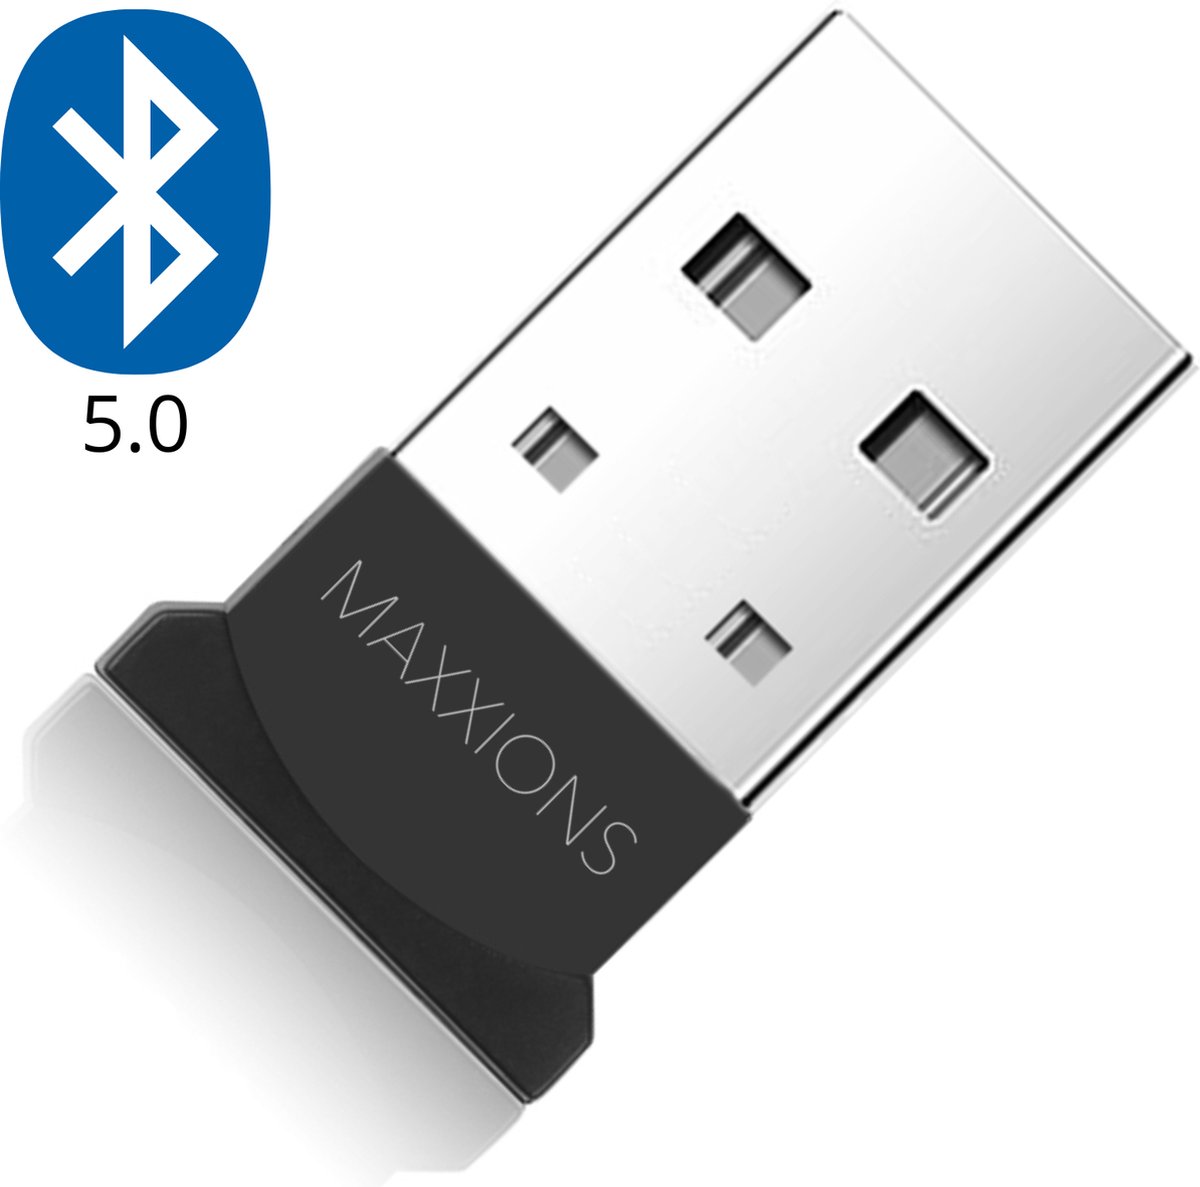 Maxxions Bluetooth Adapter - Bluetooth 5.0 Dongle - Inclusief CD - Maxxions